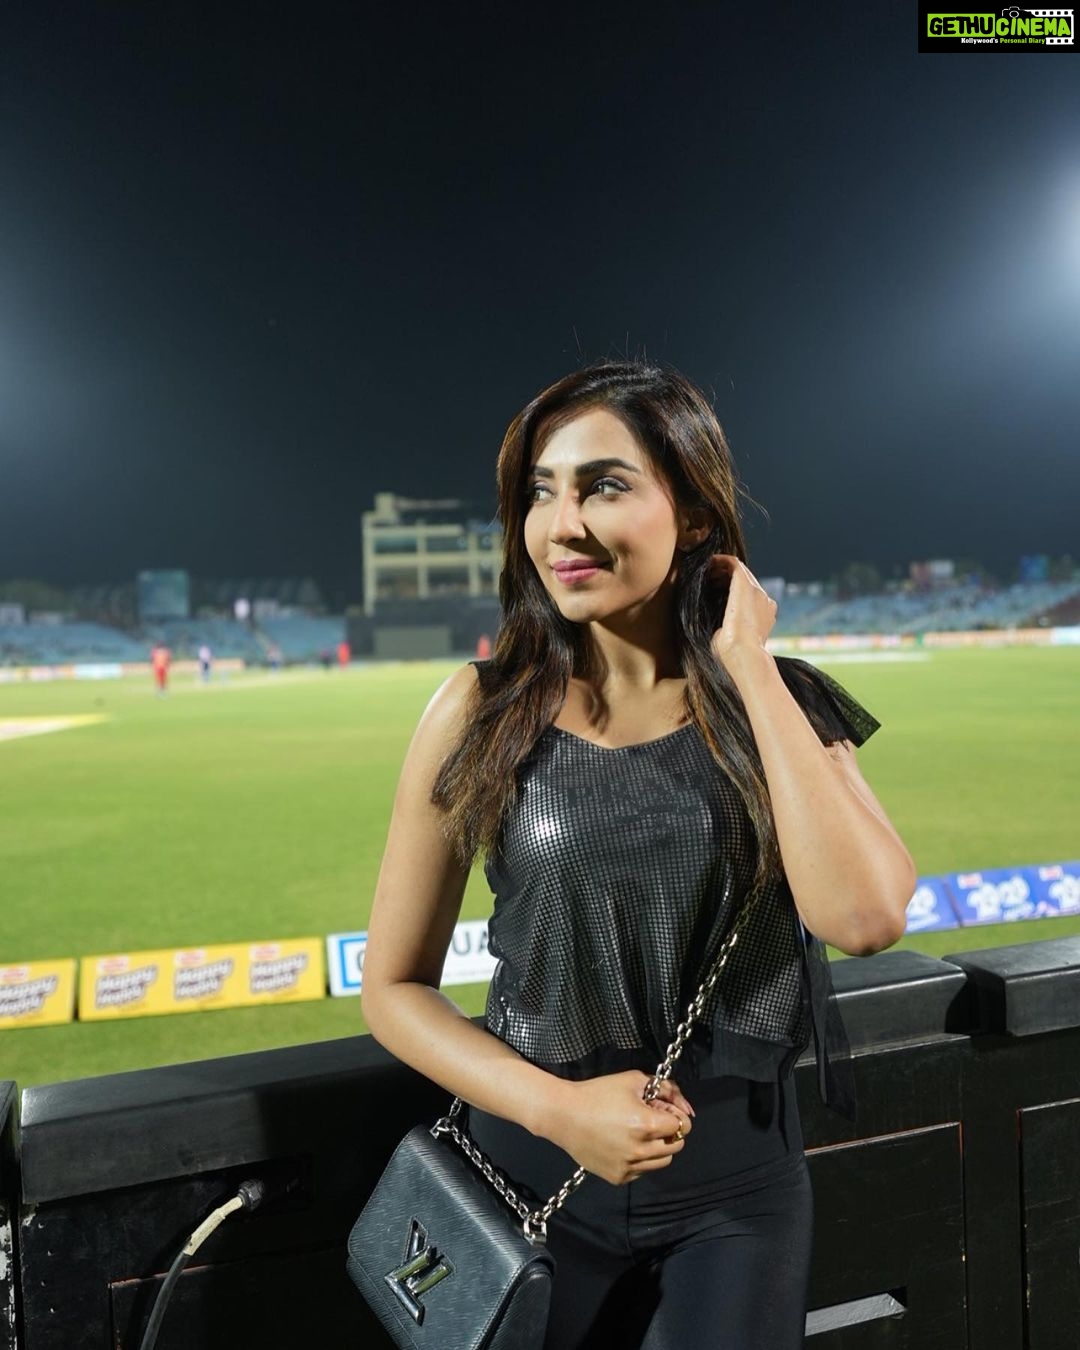 Parvatii Nair - 97K Likes - Most Liked Instagram Photos